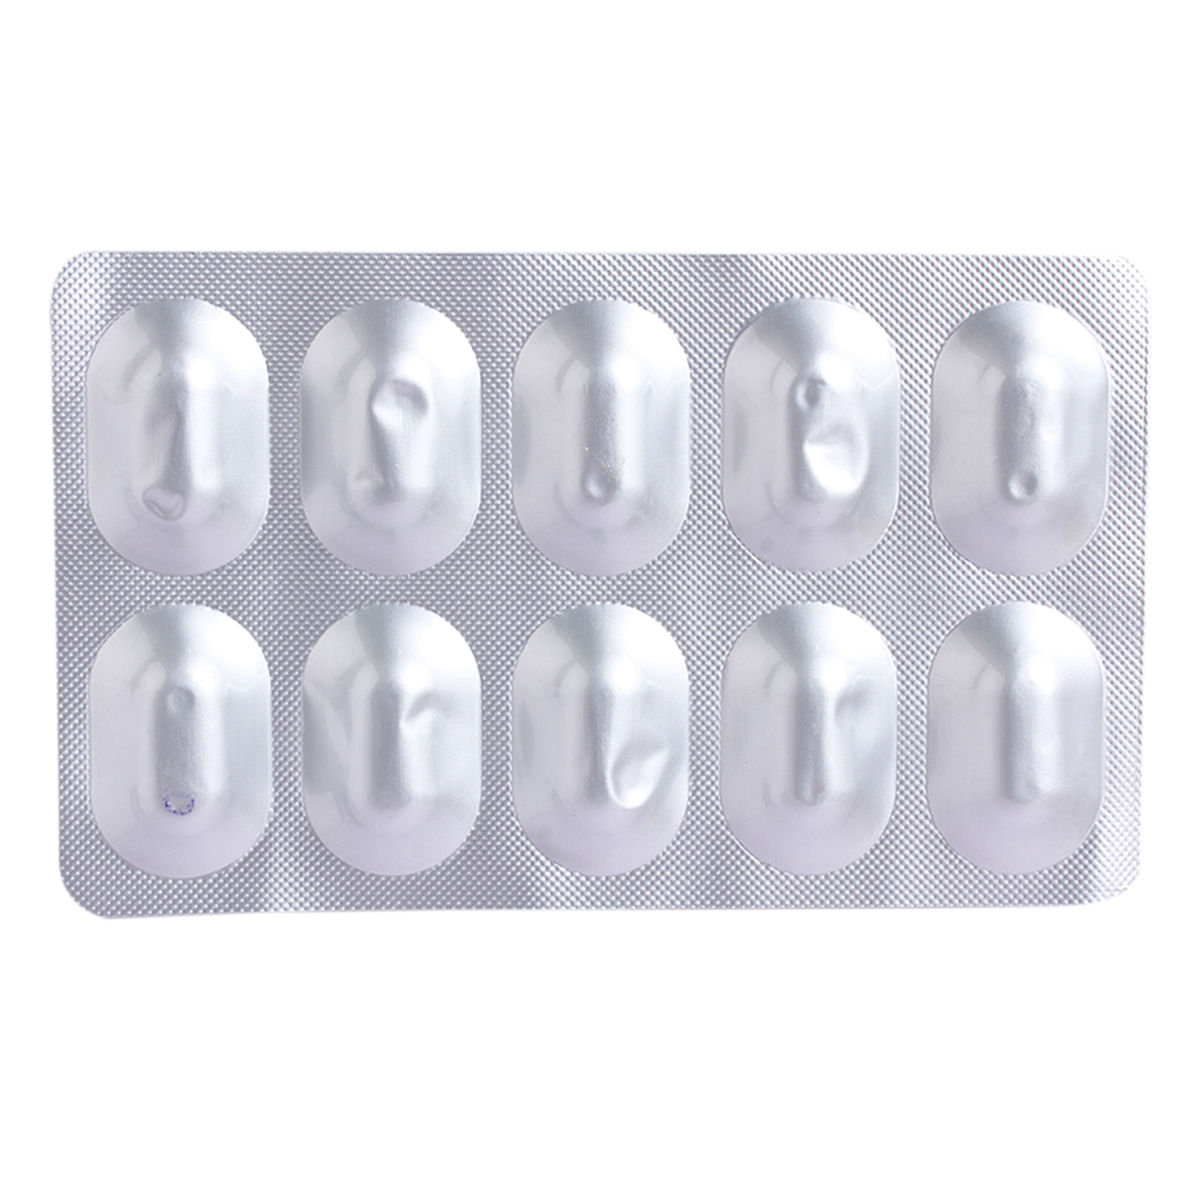 BMD-Heal Tablet 10's, Pack of 10 TABLETS